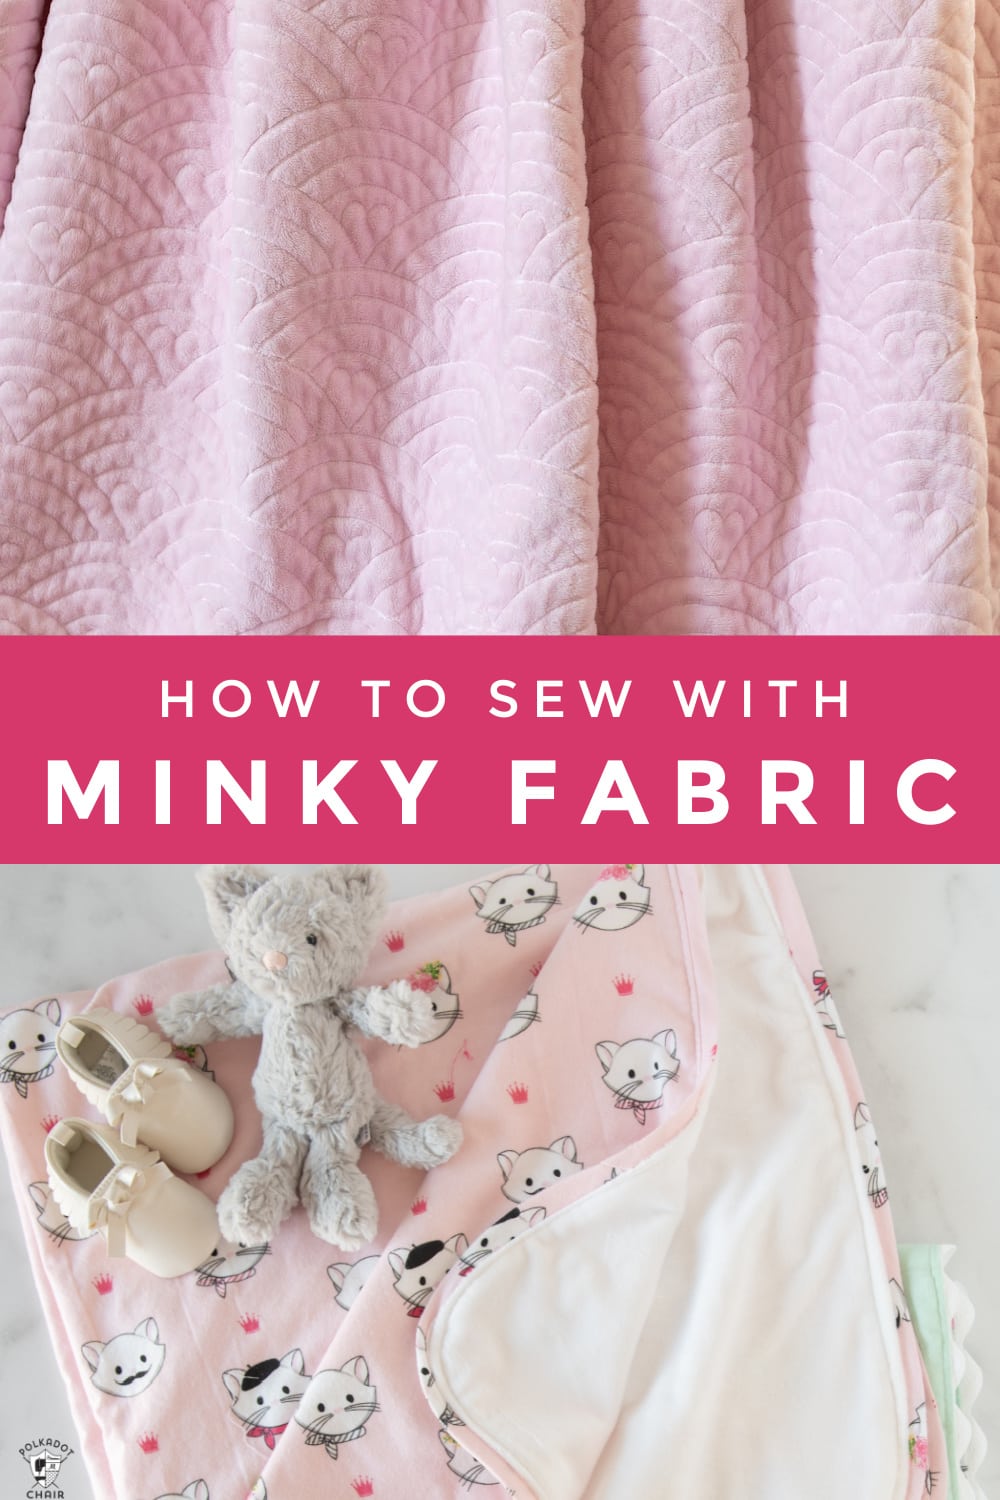 Tips for Sewing with Minky Fabric (Cuddle or Plush Fabric) –   Blog